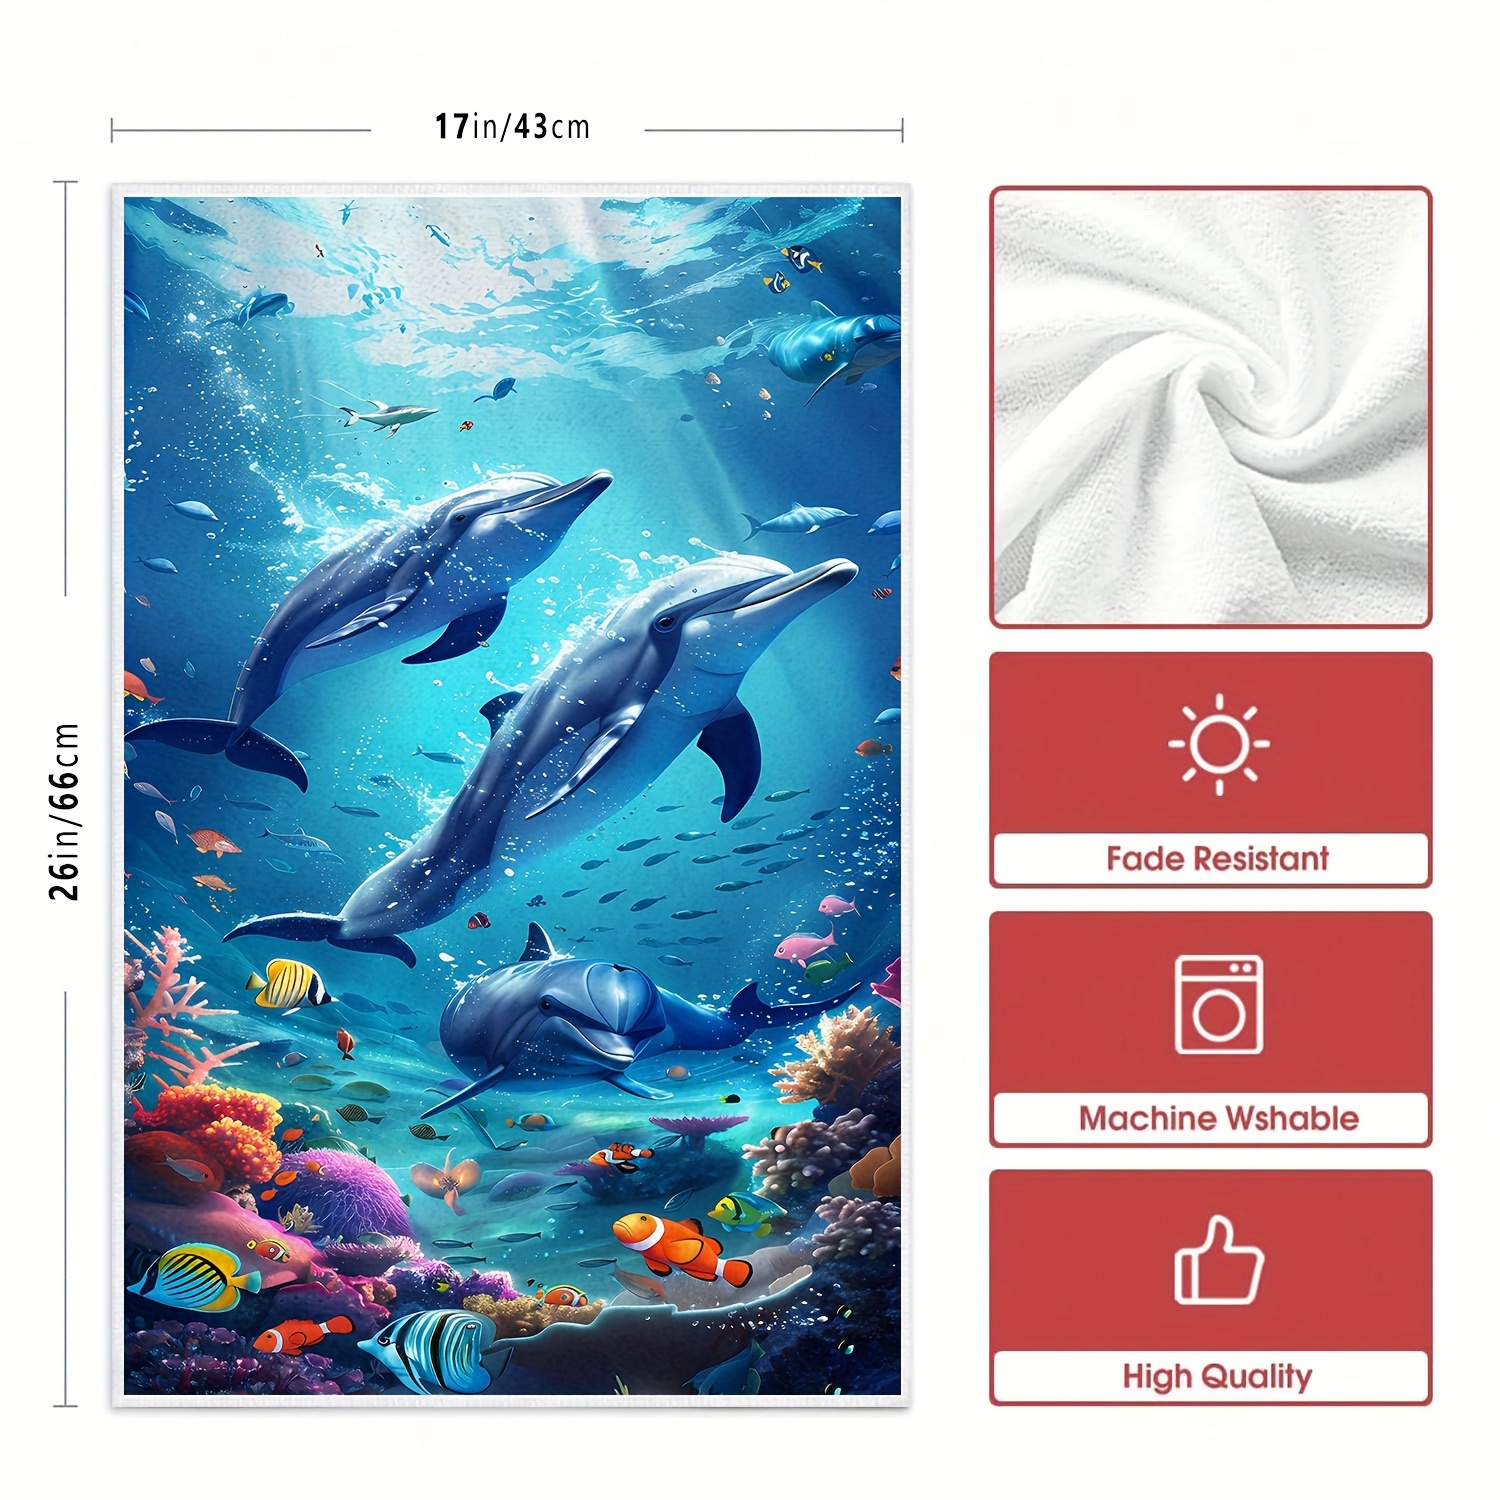 

2-pack Dolphin Ocean Theme Microfiber Dish Towels - Modern Cartoon Design, Soft & Durable, Knit Fabric Hand Towel For Cooking, Baking, Housewarming Gifts - Absorbent, Machine Washable Kitchen Towels